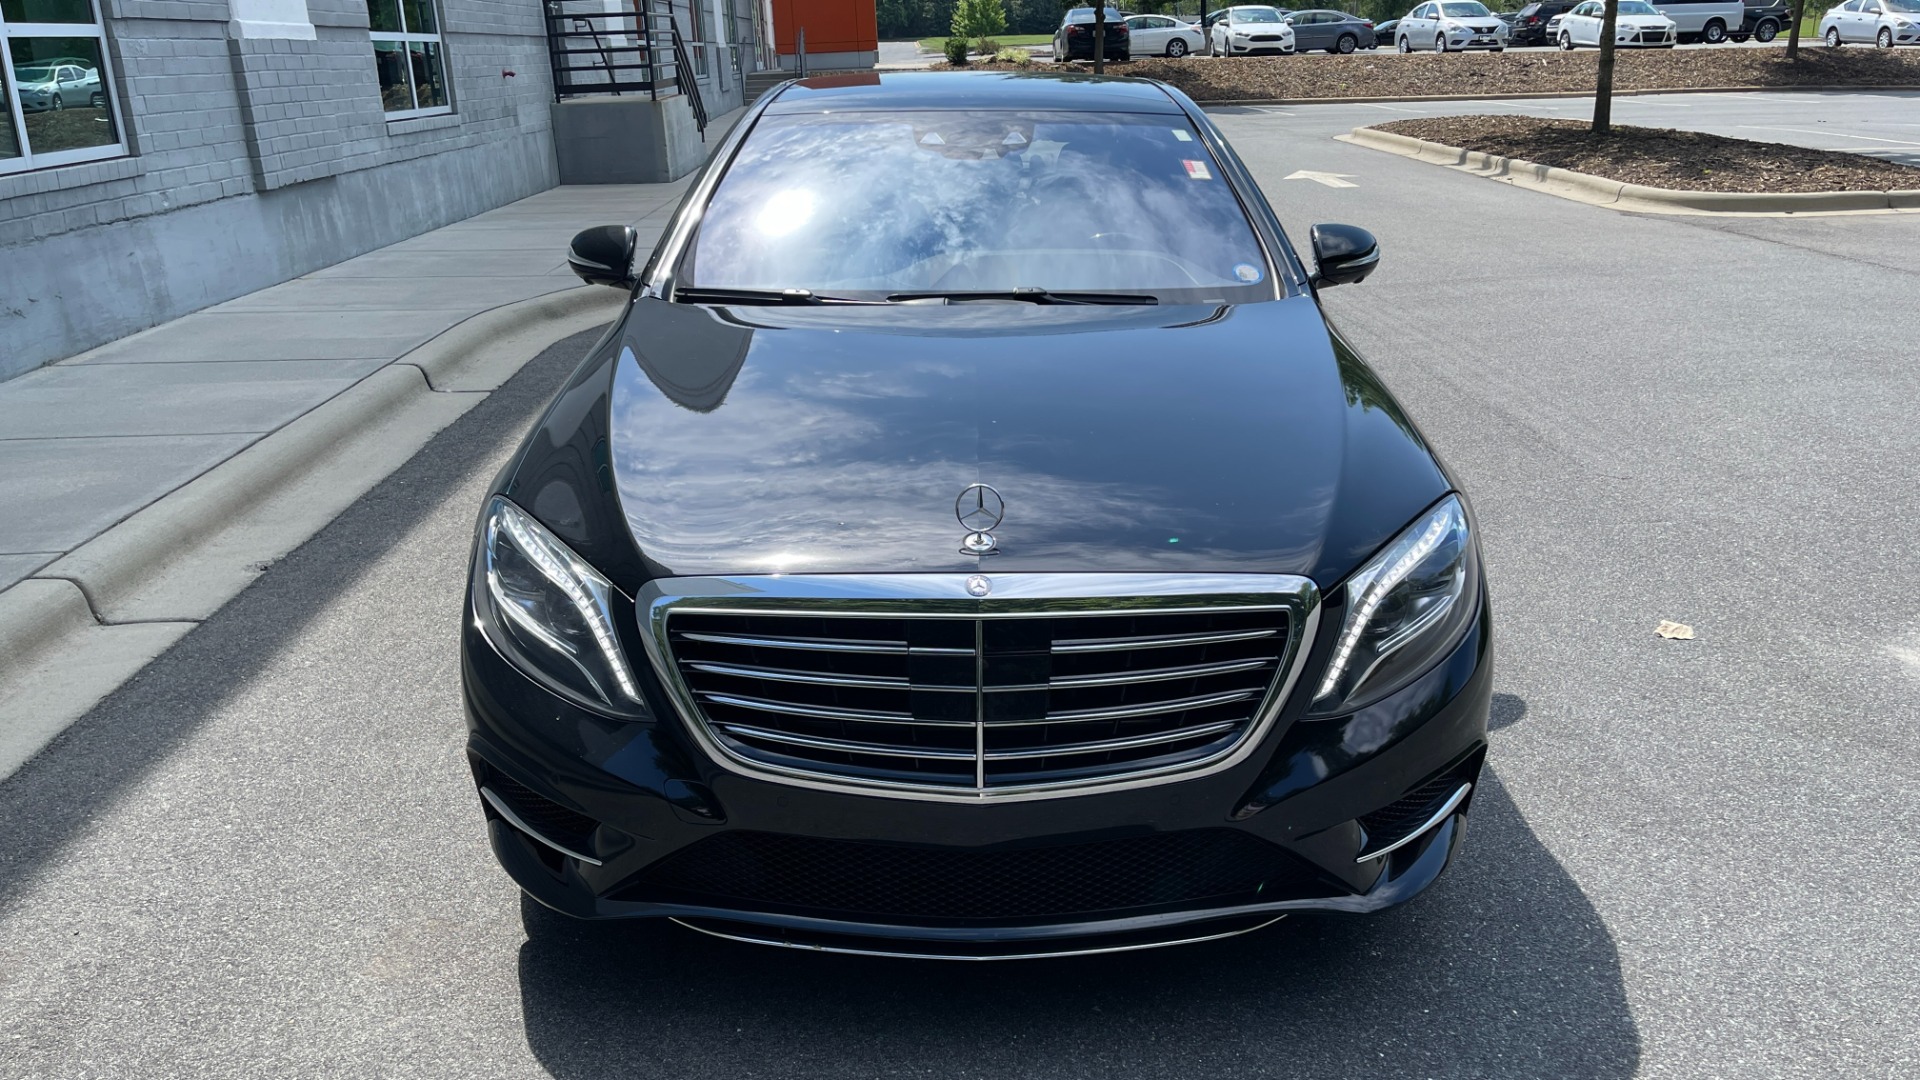 Used 2015 Mercedes-Benz S-Class S550 / 20IN AMG WHEELS / SPORT / COMFORT / PREMIUM / DRIVER ASSIST for sale $38,595 at Formula Imports in Charlotte NC 28227 51